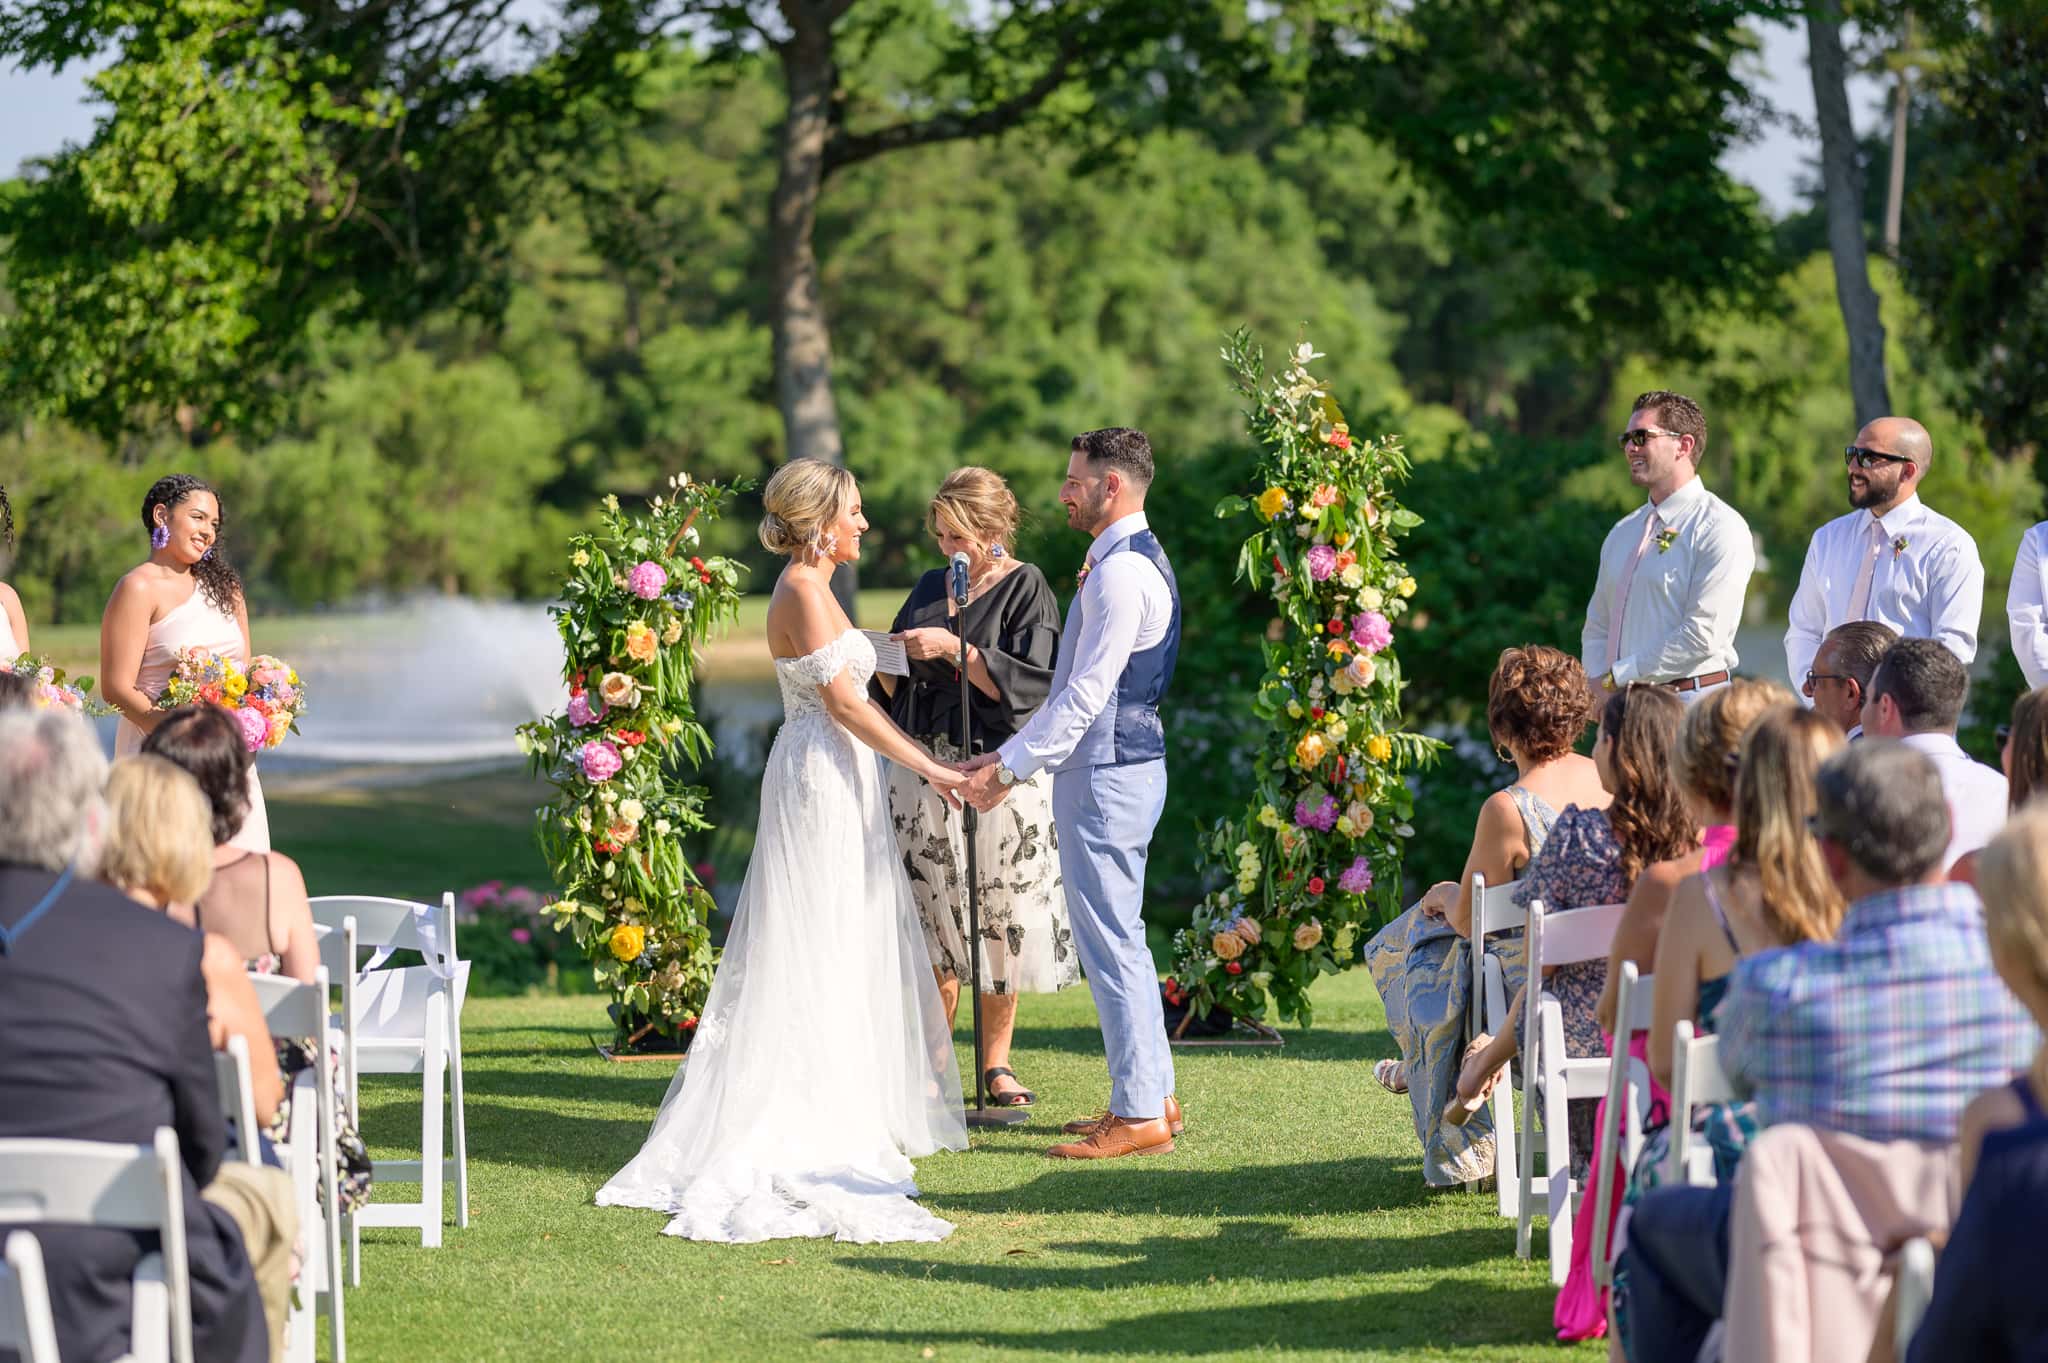 Holding hands during the ceremony - Pawleys Plantation Golf & Country Club